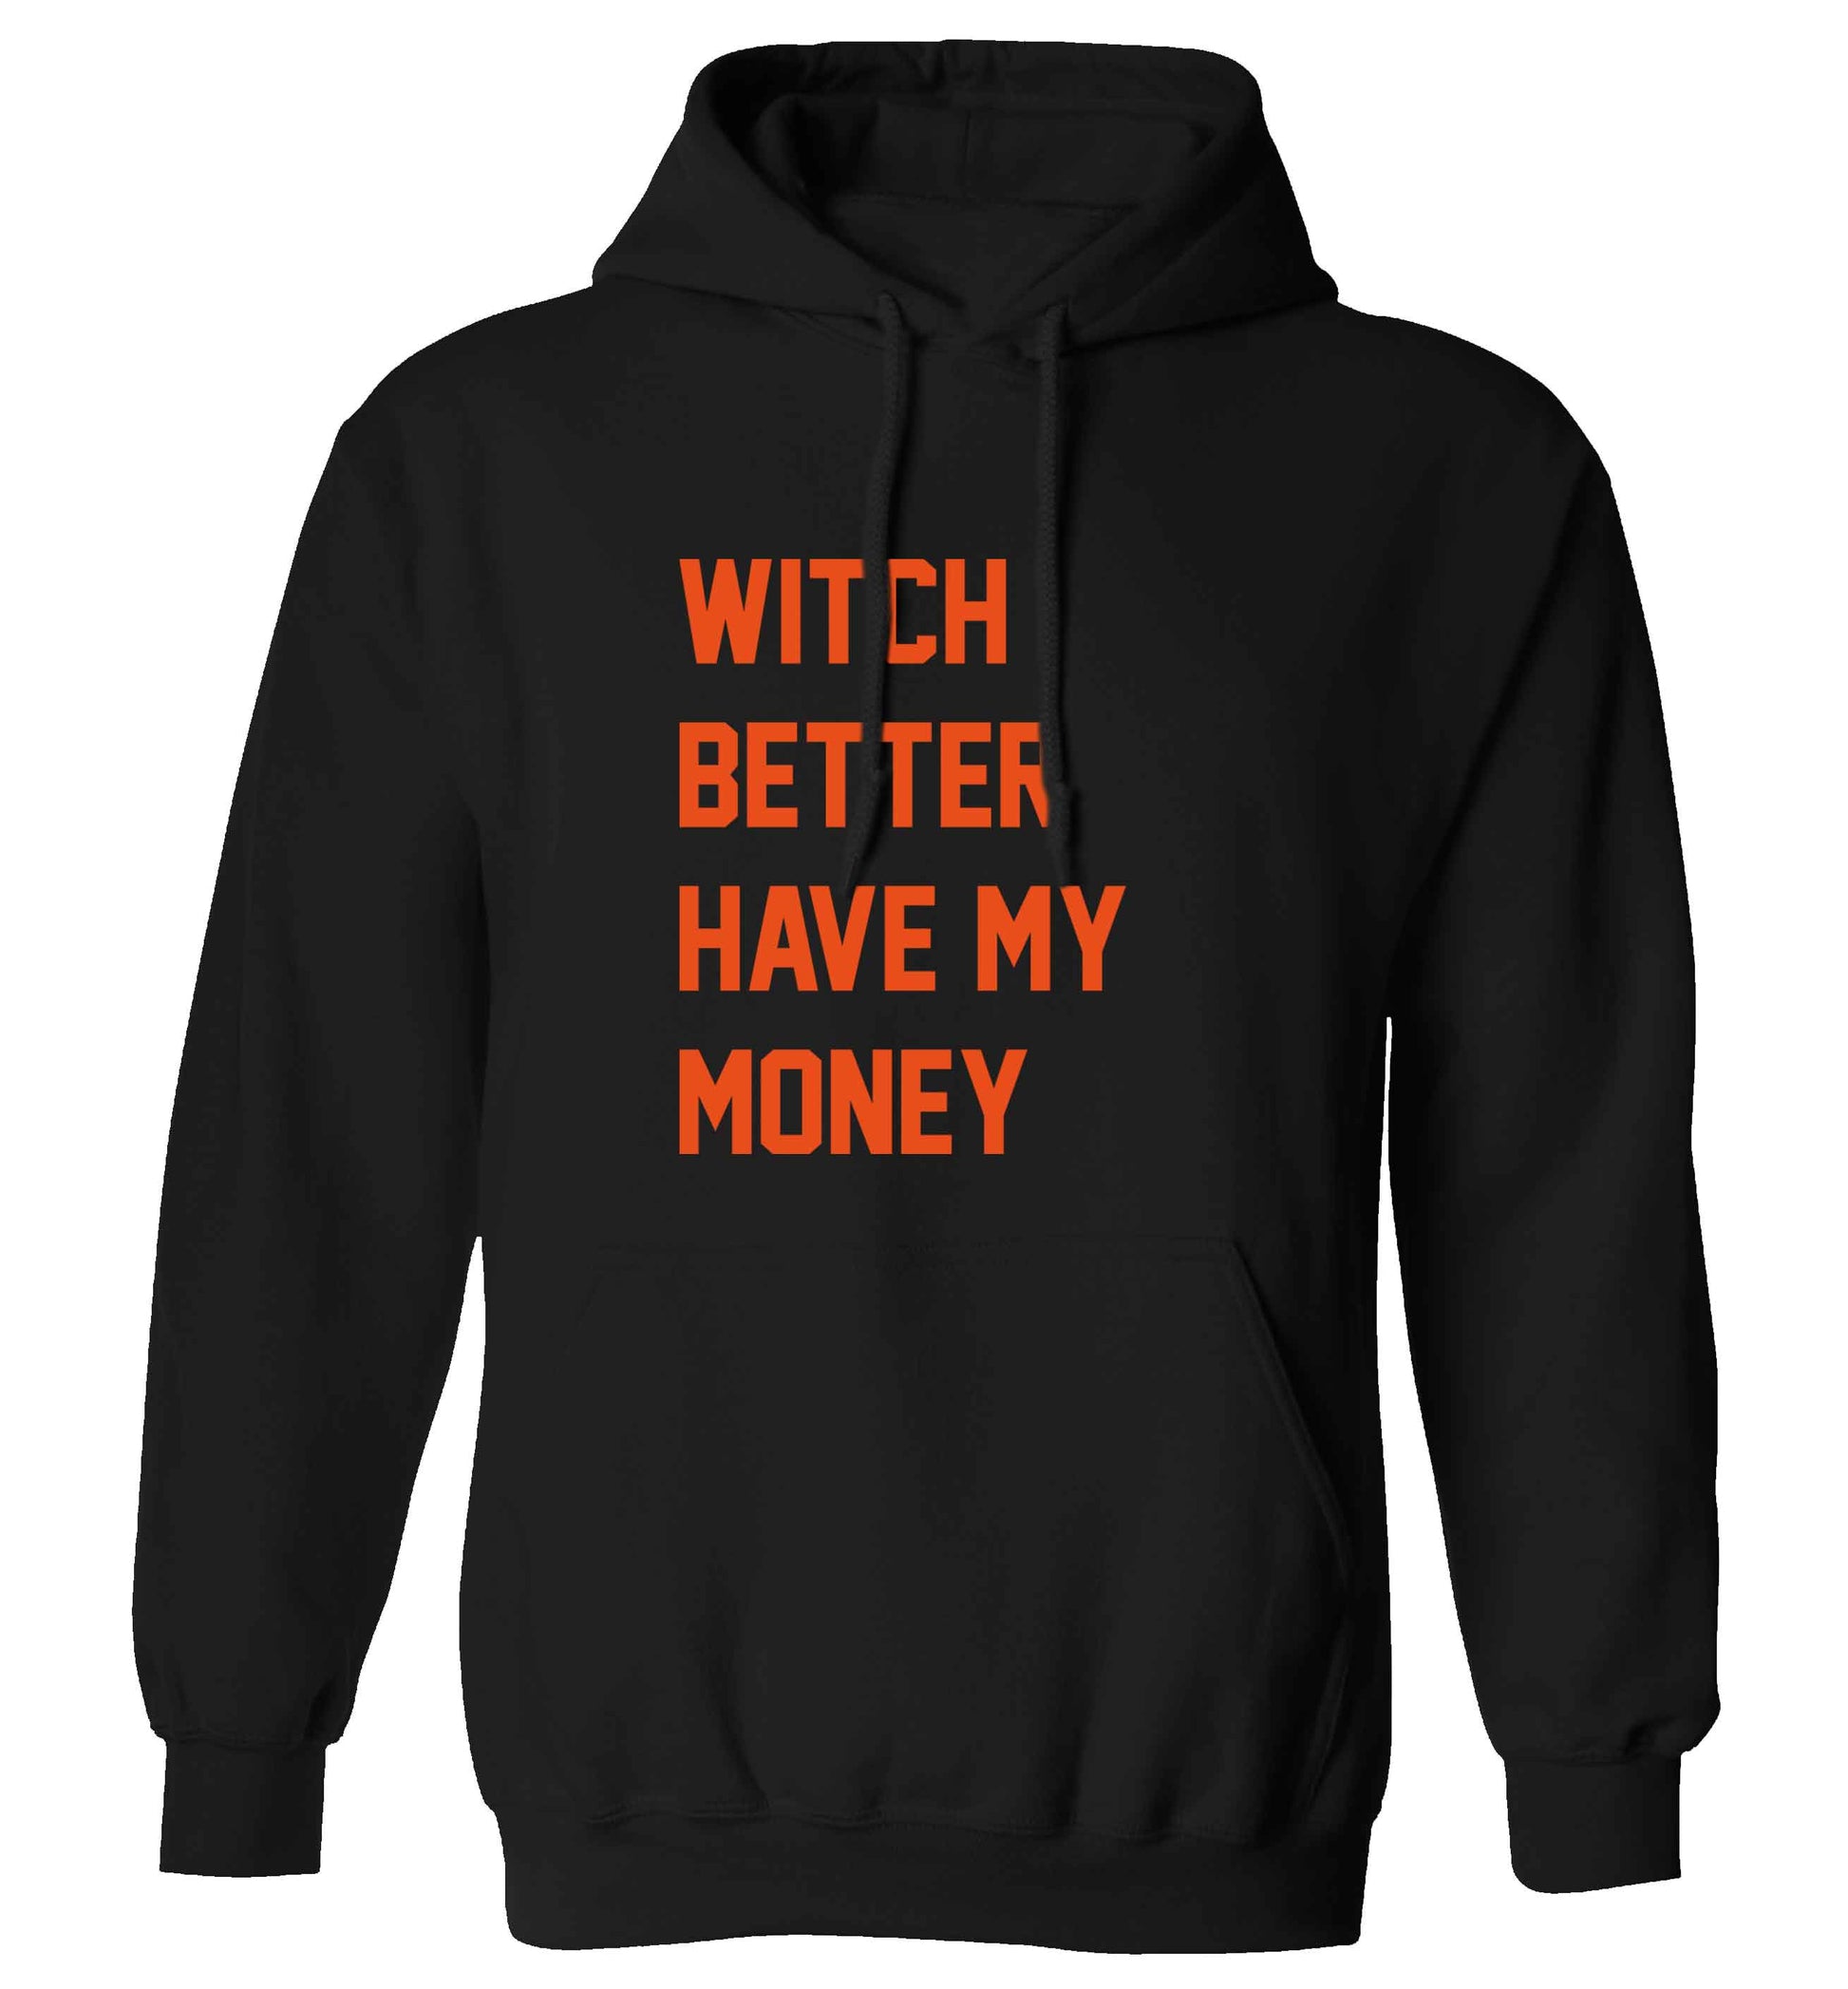 Witch better have my money adults unisex black hoodie 2XL